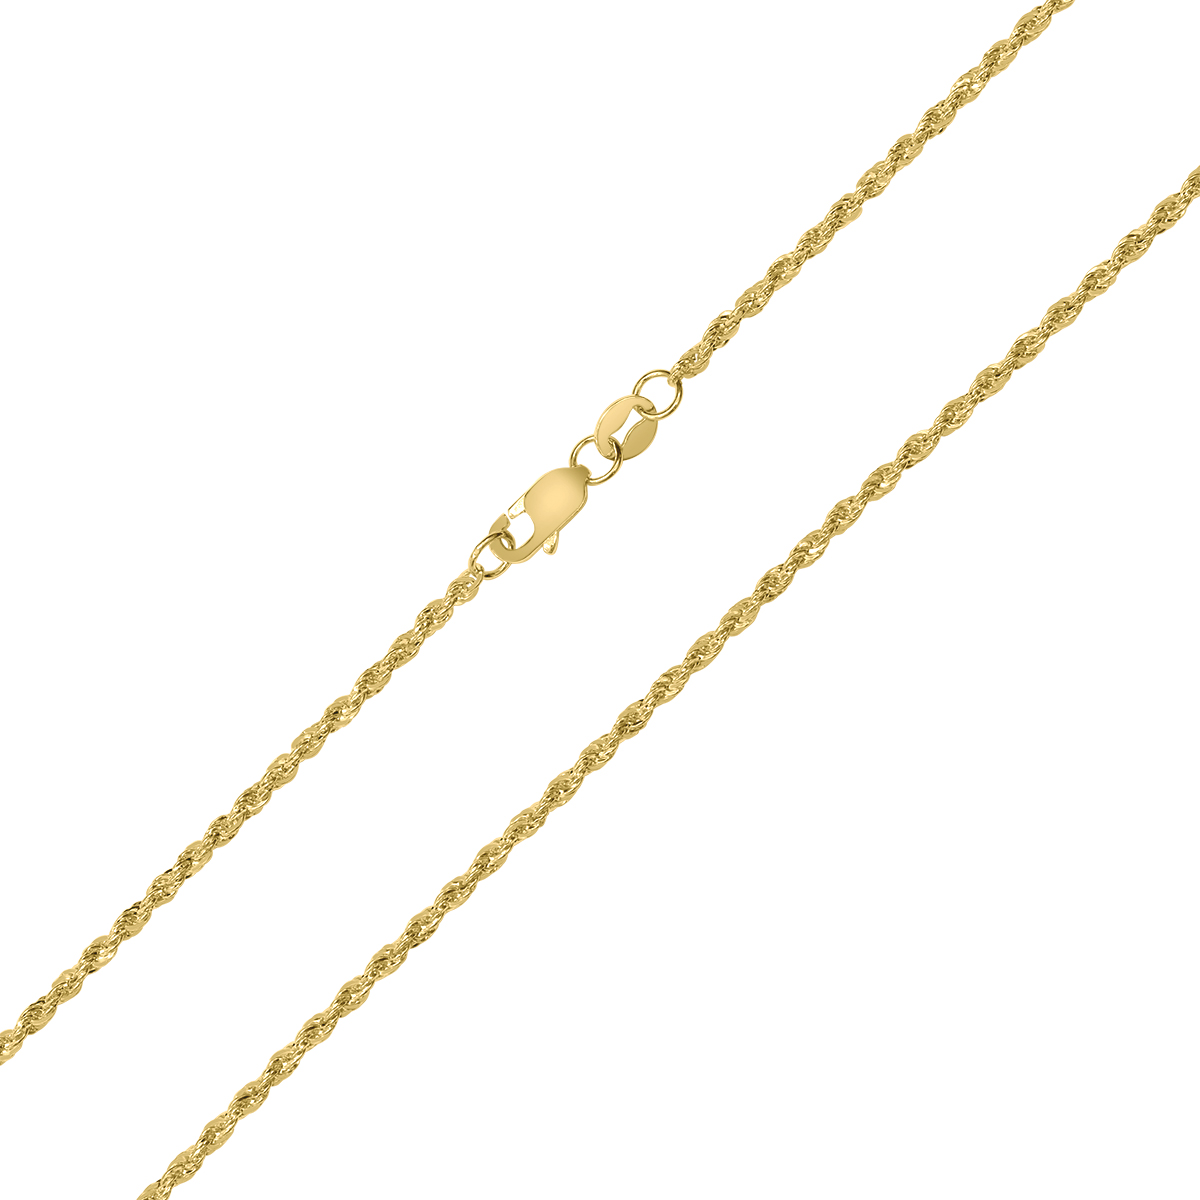 10K Yellow Gold 1.5MM Sparkle Rope Chain With Lobster Clasp - 18 Inch